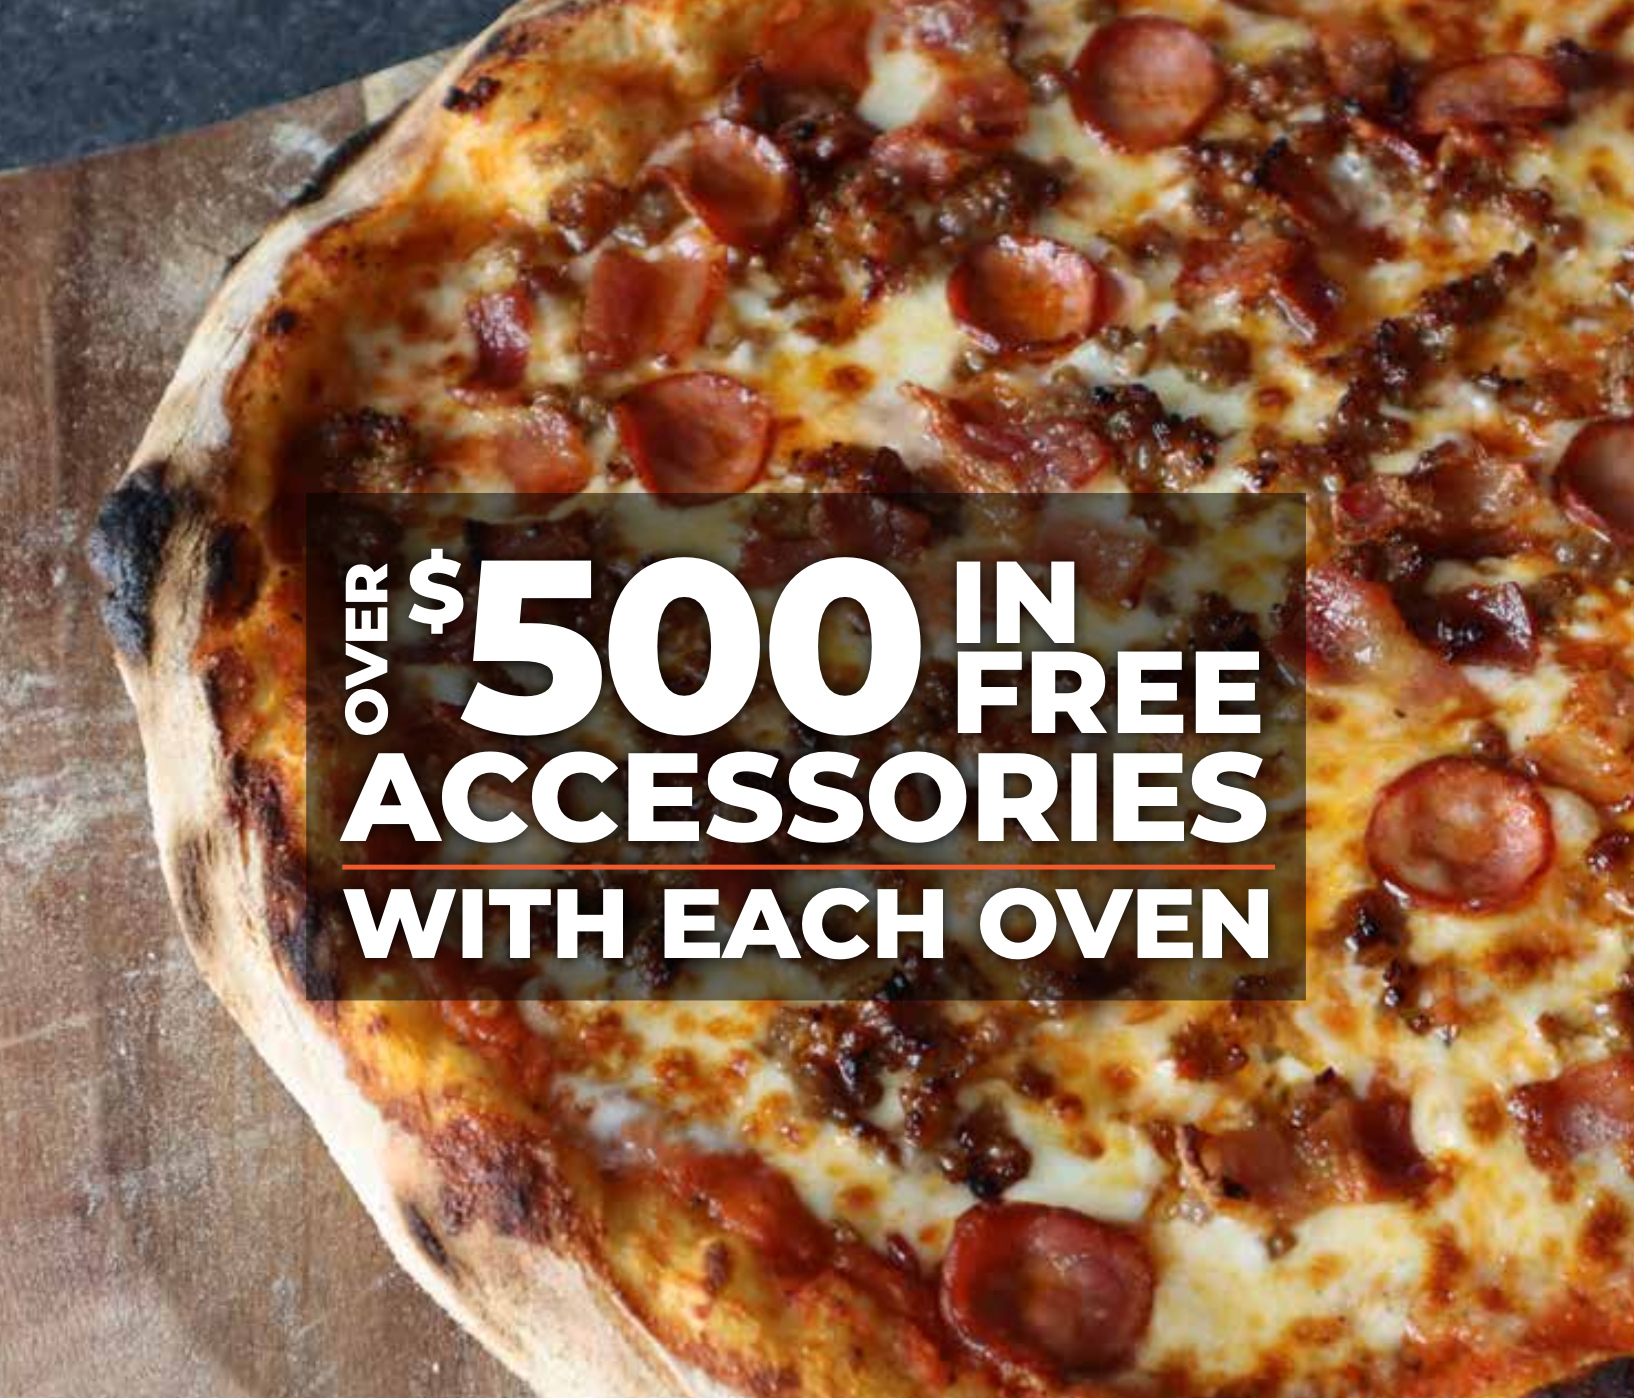 Overfunded dollars in free accessories with each Pinnacolo pizza ovens oven